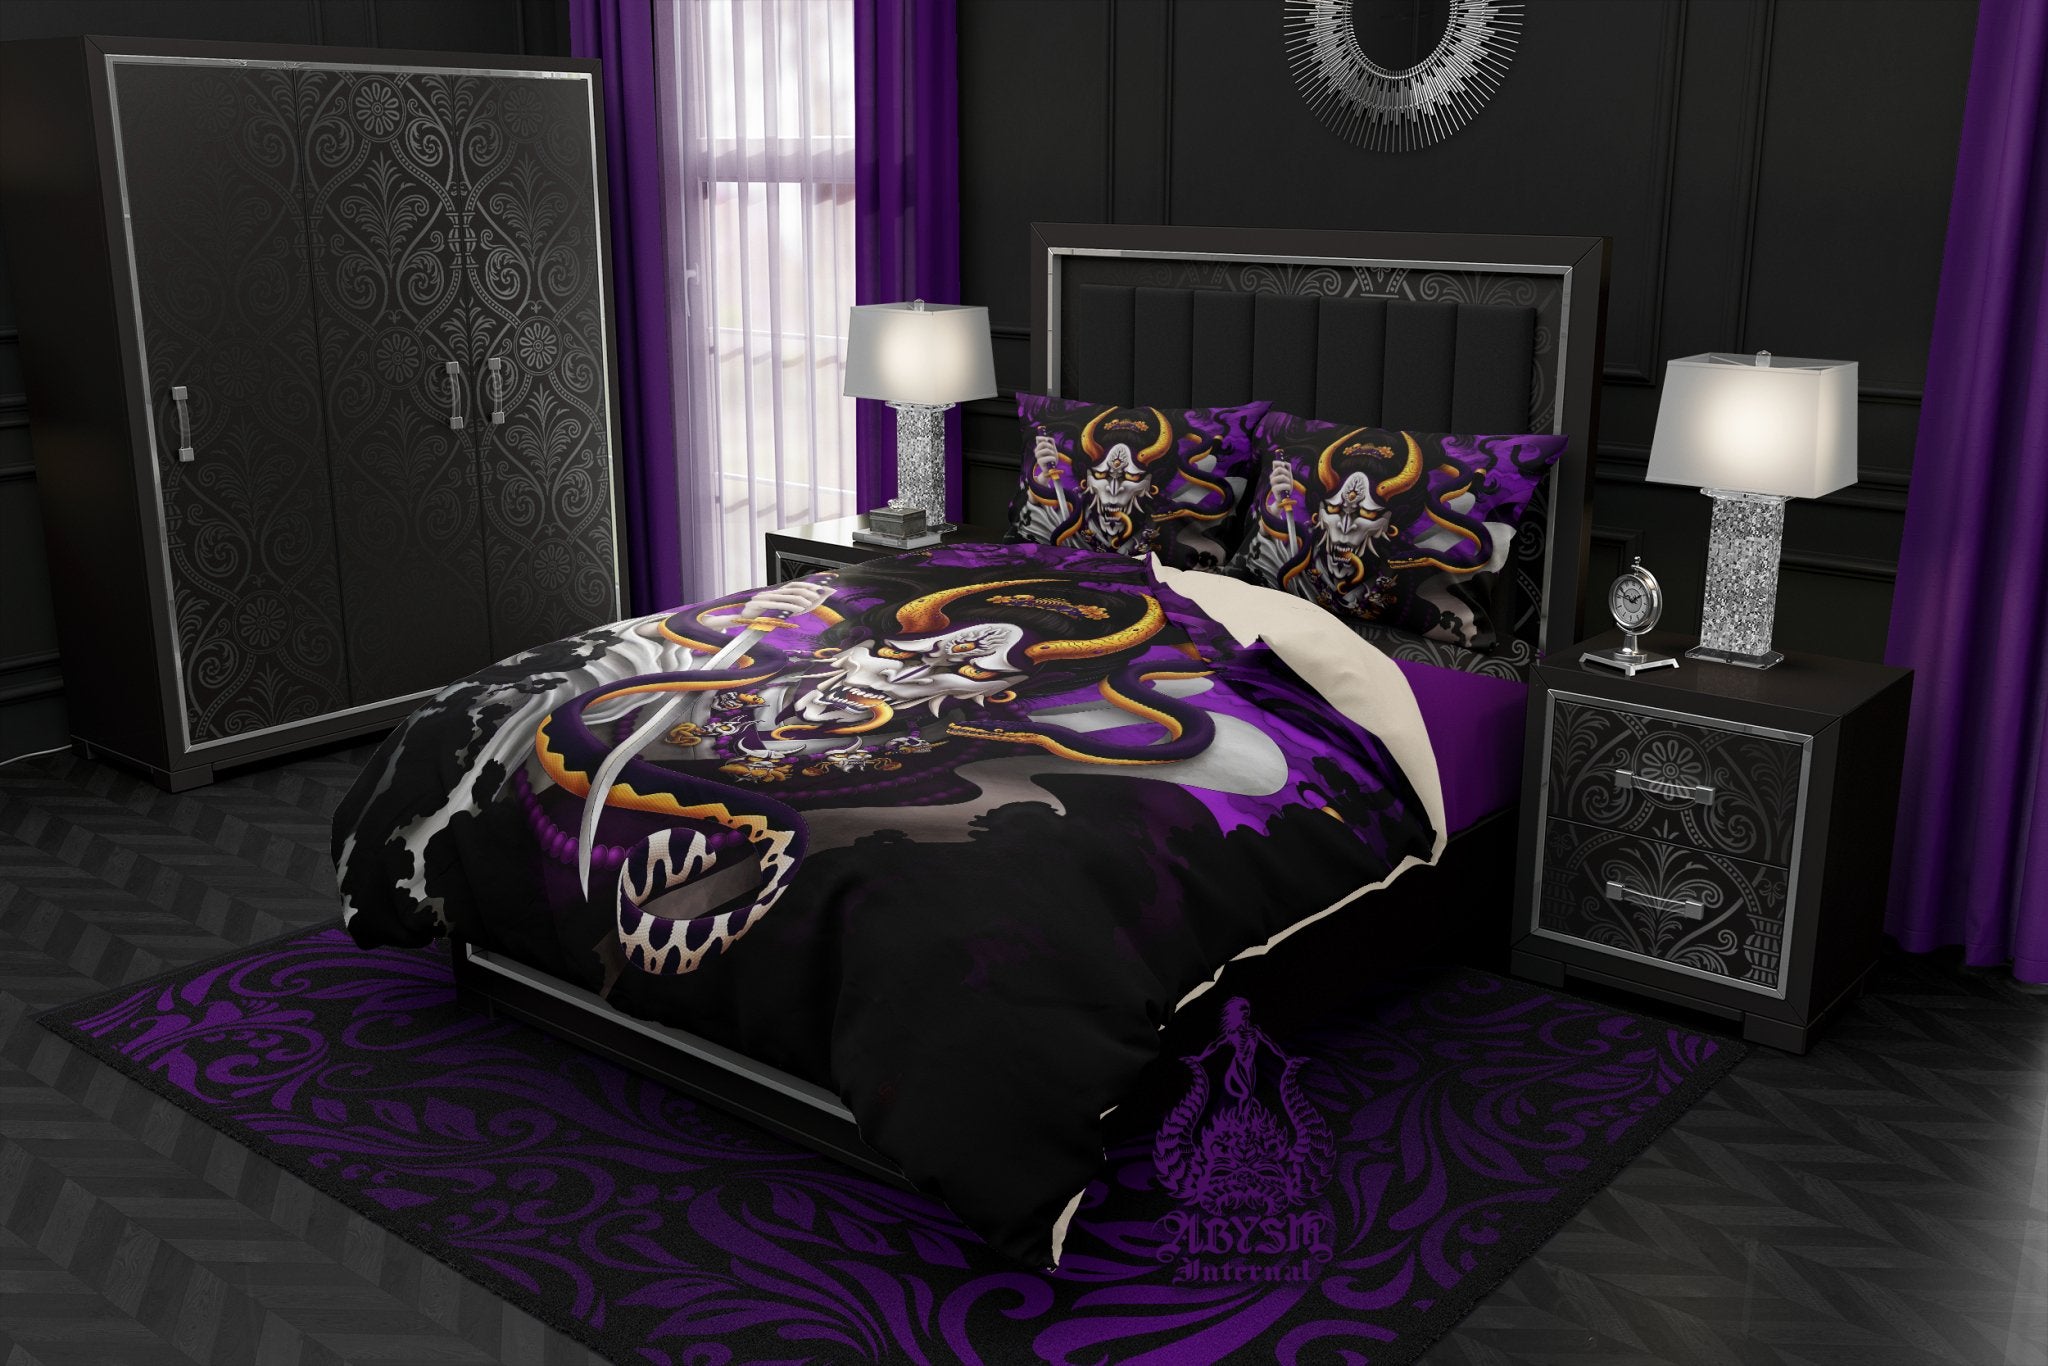 Hannya Bedding Set, Comforter or Duvet, Anime Bed Cover, Purple White Goth Bedroom Decor, King, Queen & Twin Size - Snake and Japanese Demon - Abysm Internal